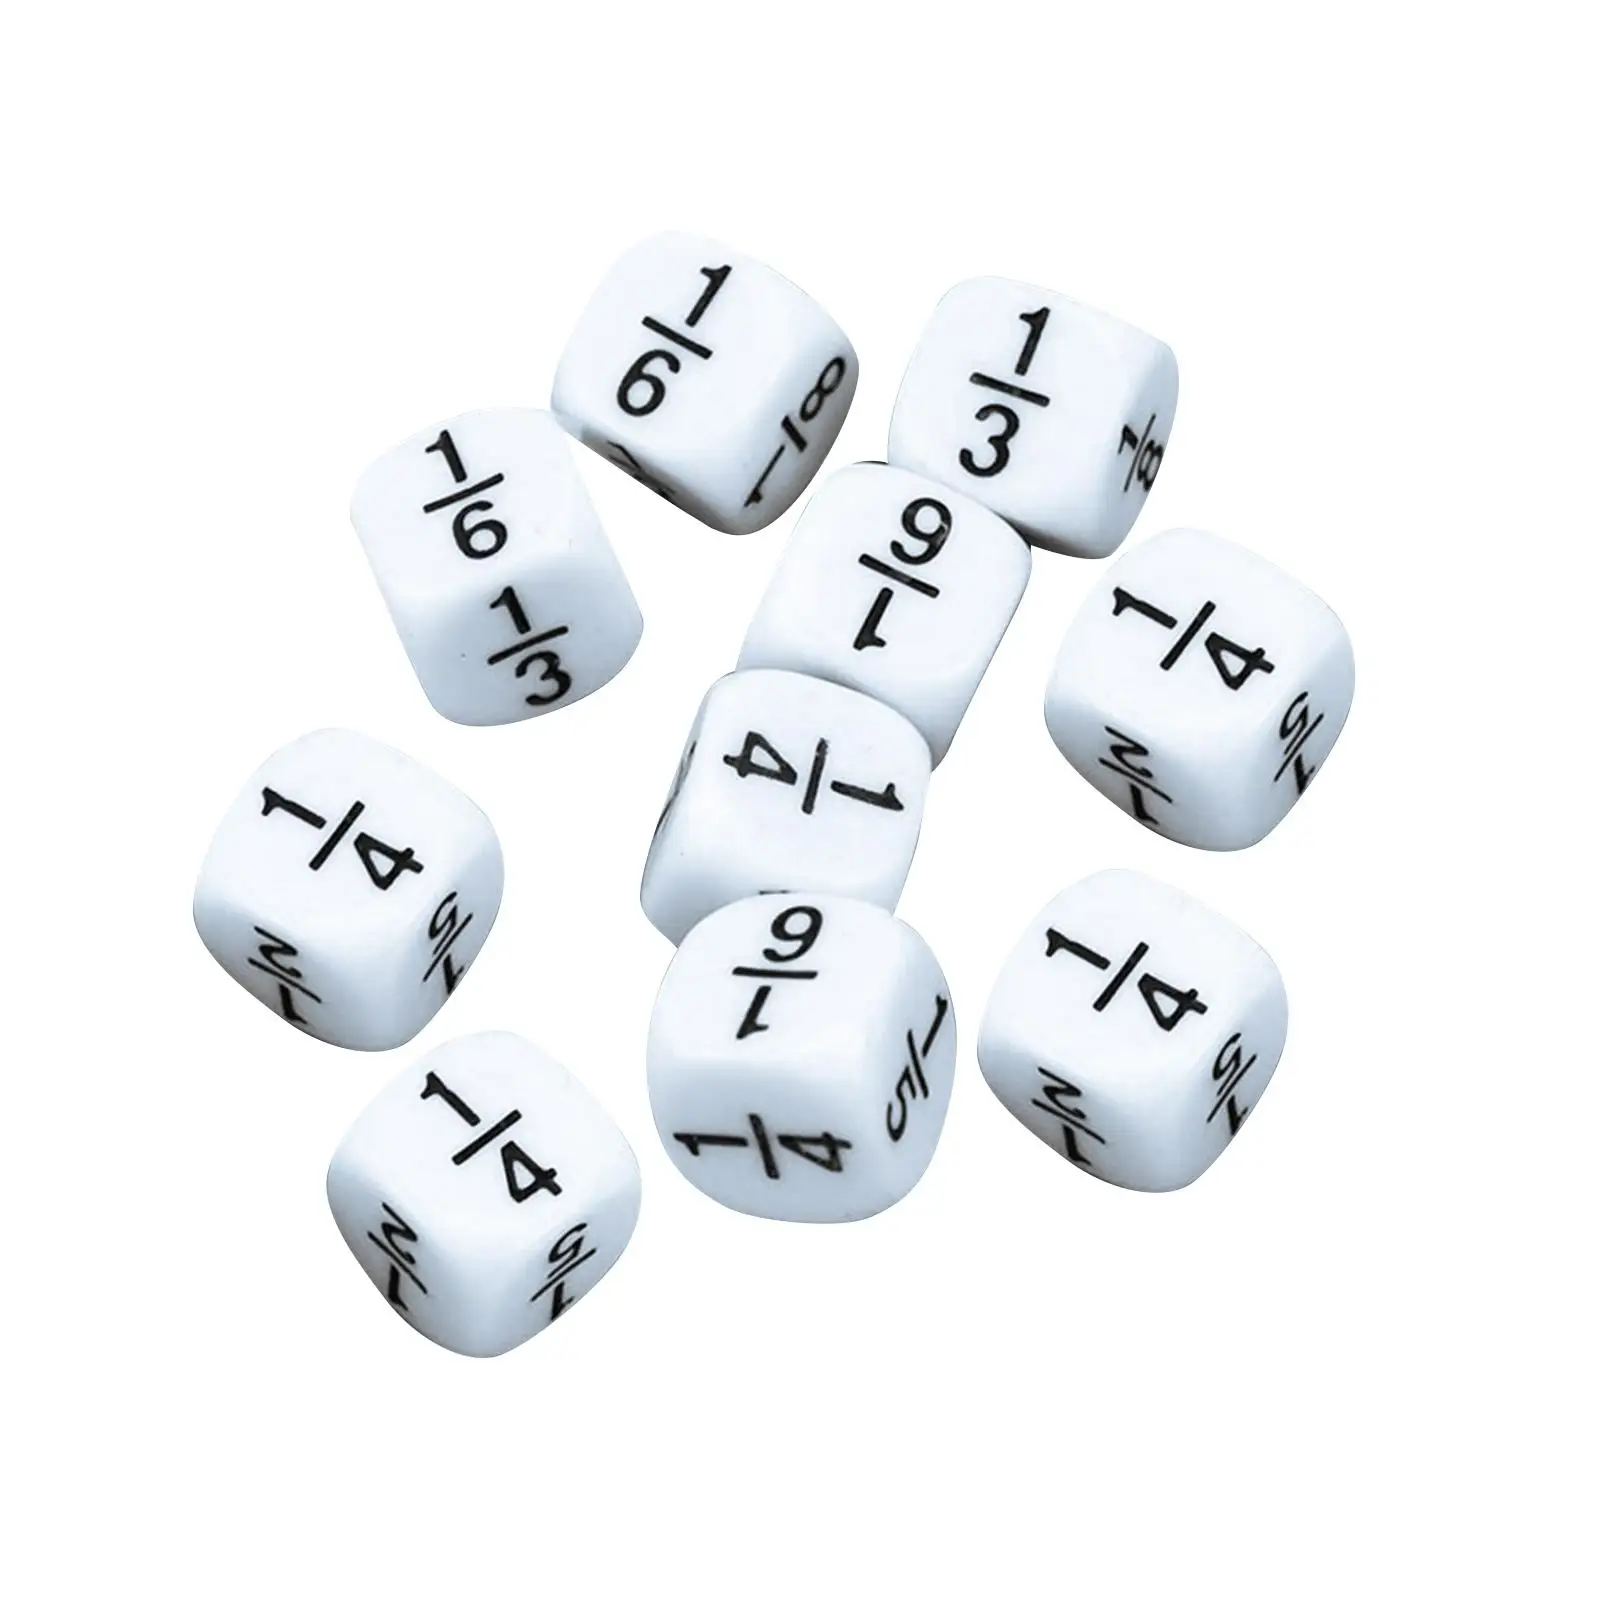 10 Pieces Fractional Number Dices Educational Toy Accessories Measure 0.6x0.6inches Photo Prop Smooth Durable for Classroom